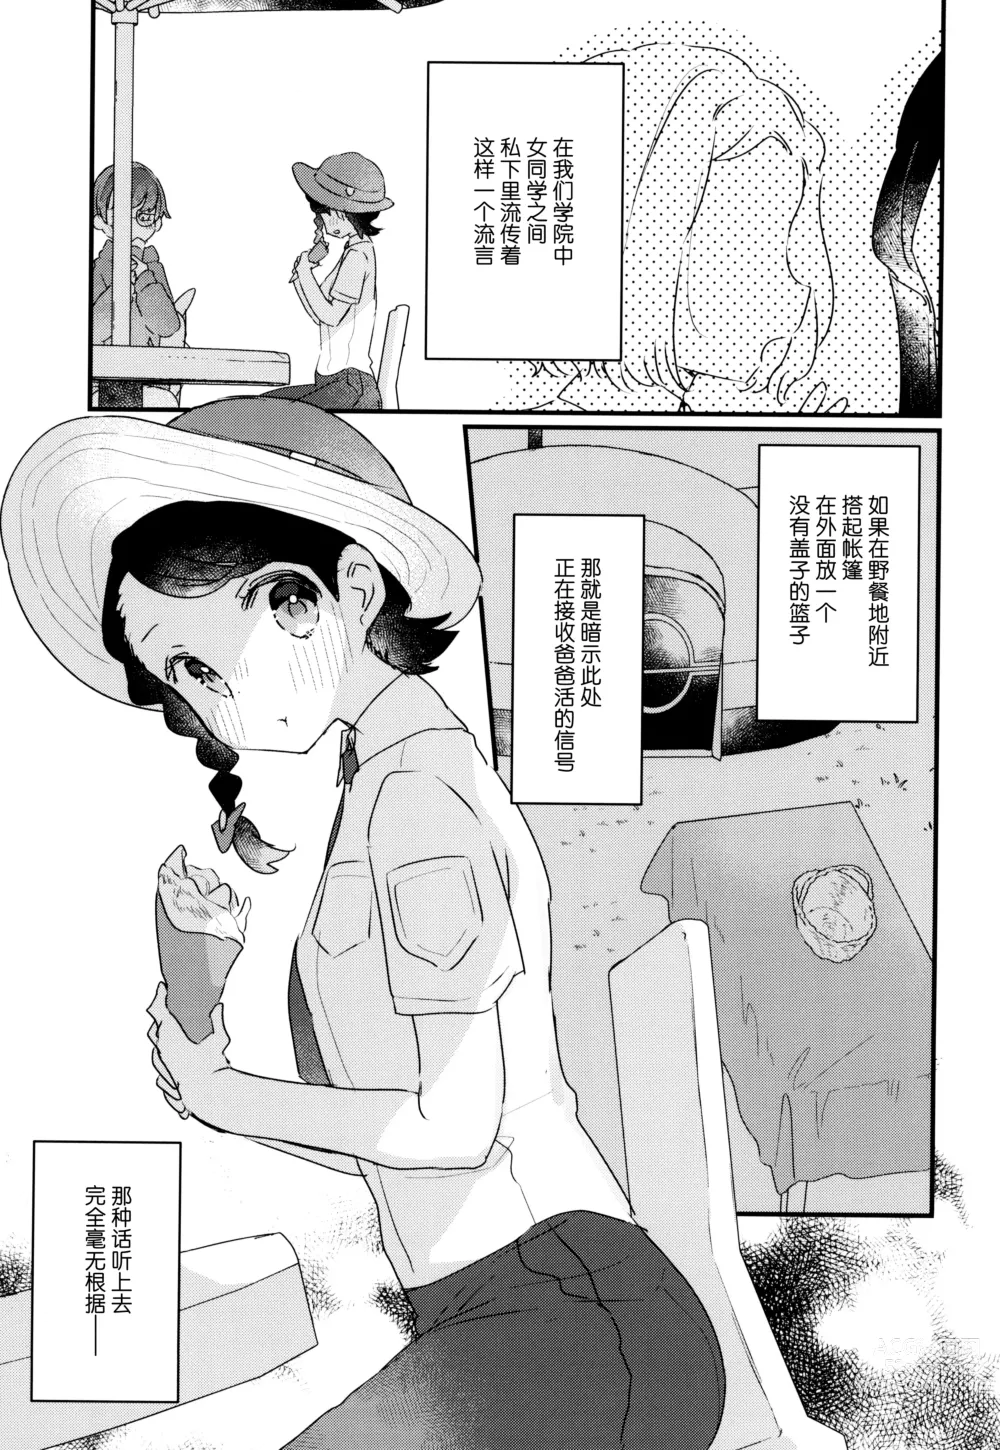 Page 3 of doujinshi 因为零花钱，完全不够用嘛